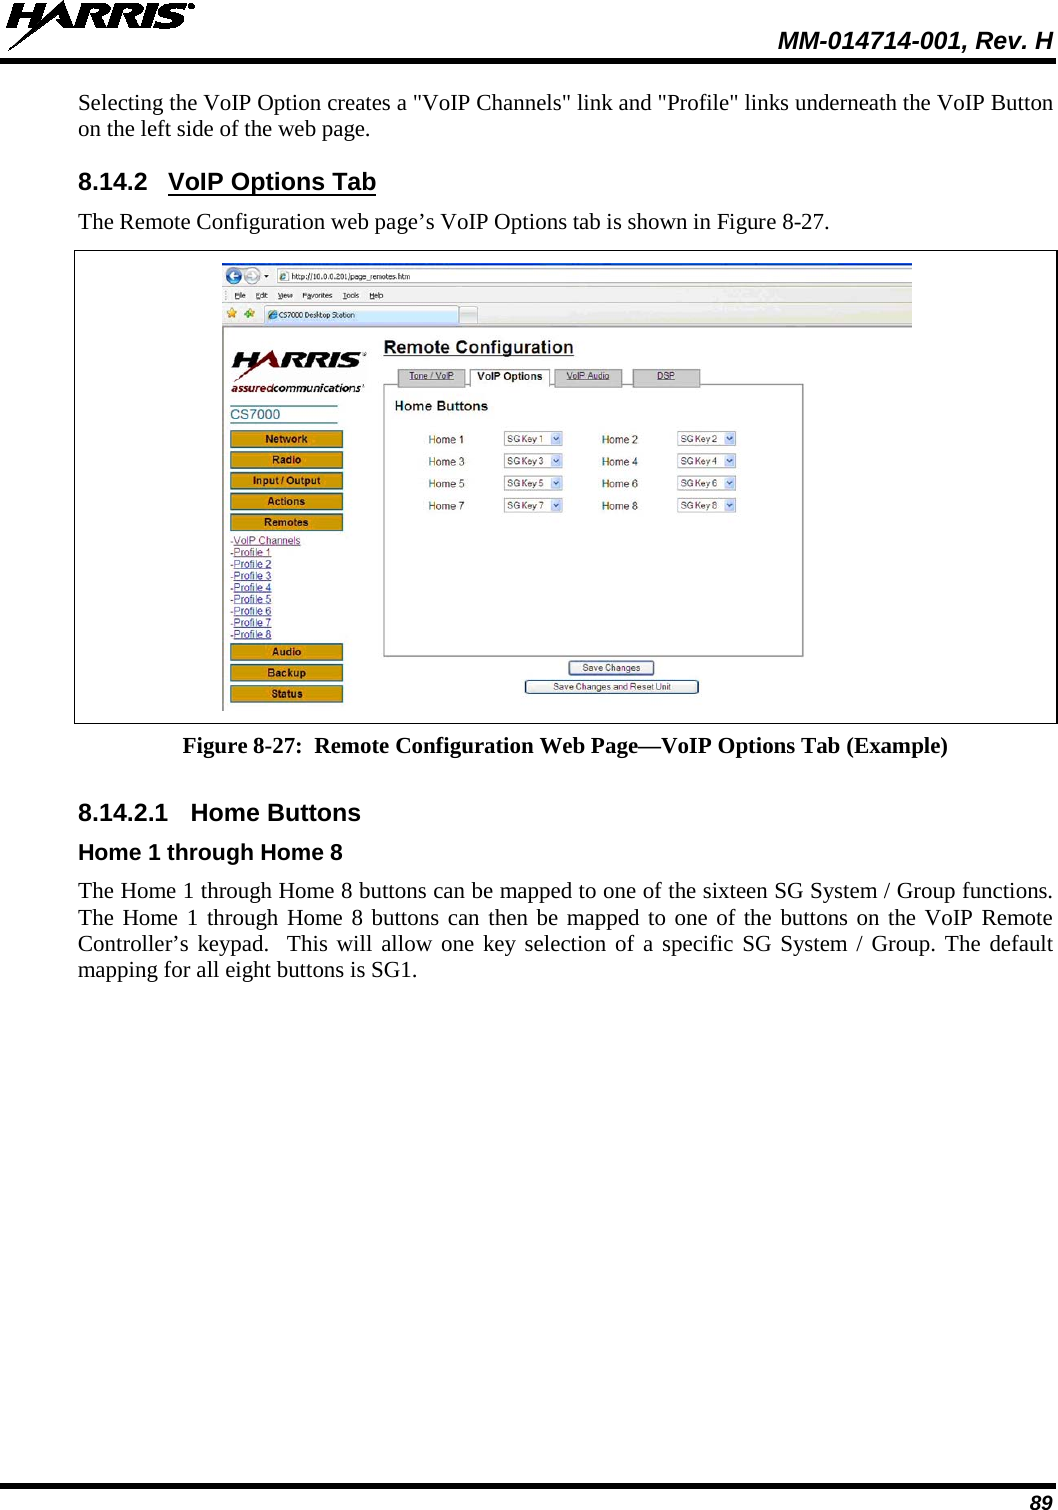  MM-014714-001, Rev. H 89 Selecting the VoIP Option creates a &quot;VoIP Channels&quot; link and &quot;Profile&quot; links underneath the VoIP Button on the left side of the web page. 8.14.2 VoIP Options Tab The Remote Configuration web page’s VoIP Options tab is shown in Figure 8-27.   Figure 8-27:  Remote Configuration Web Page—VoIP Options Tab (Example)  8.14.2.1 Home Buttons Home 1 through Home 8 The Home 1 through Home 8 buttons can be mapped to one of the sixteen SG System / Group functions.  The Home 1 through Home 8 buttons can then be mapped to one of the buttons on the VoIP Remote Controller’s keypad.  This will allow one key selection of a specific SG System / Group. The default mapping for all eight buttons is SG1. 